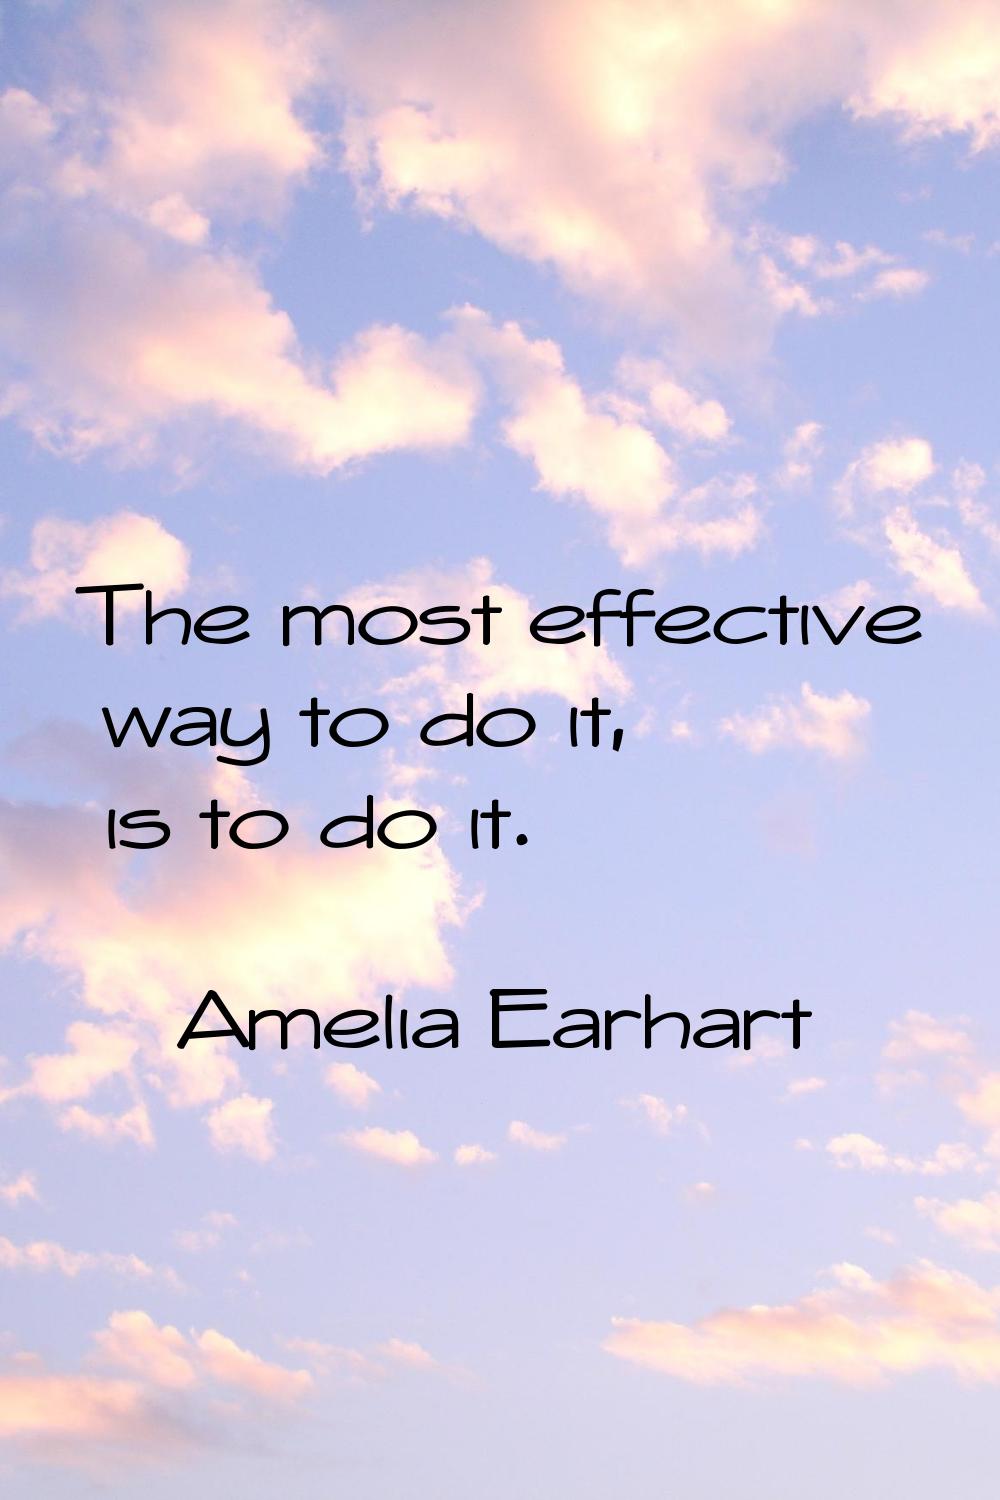 The most effective way to do it, is to do it.